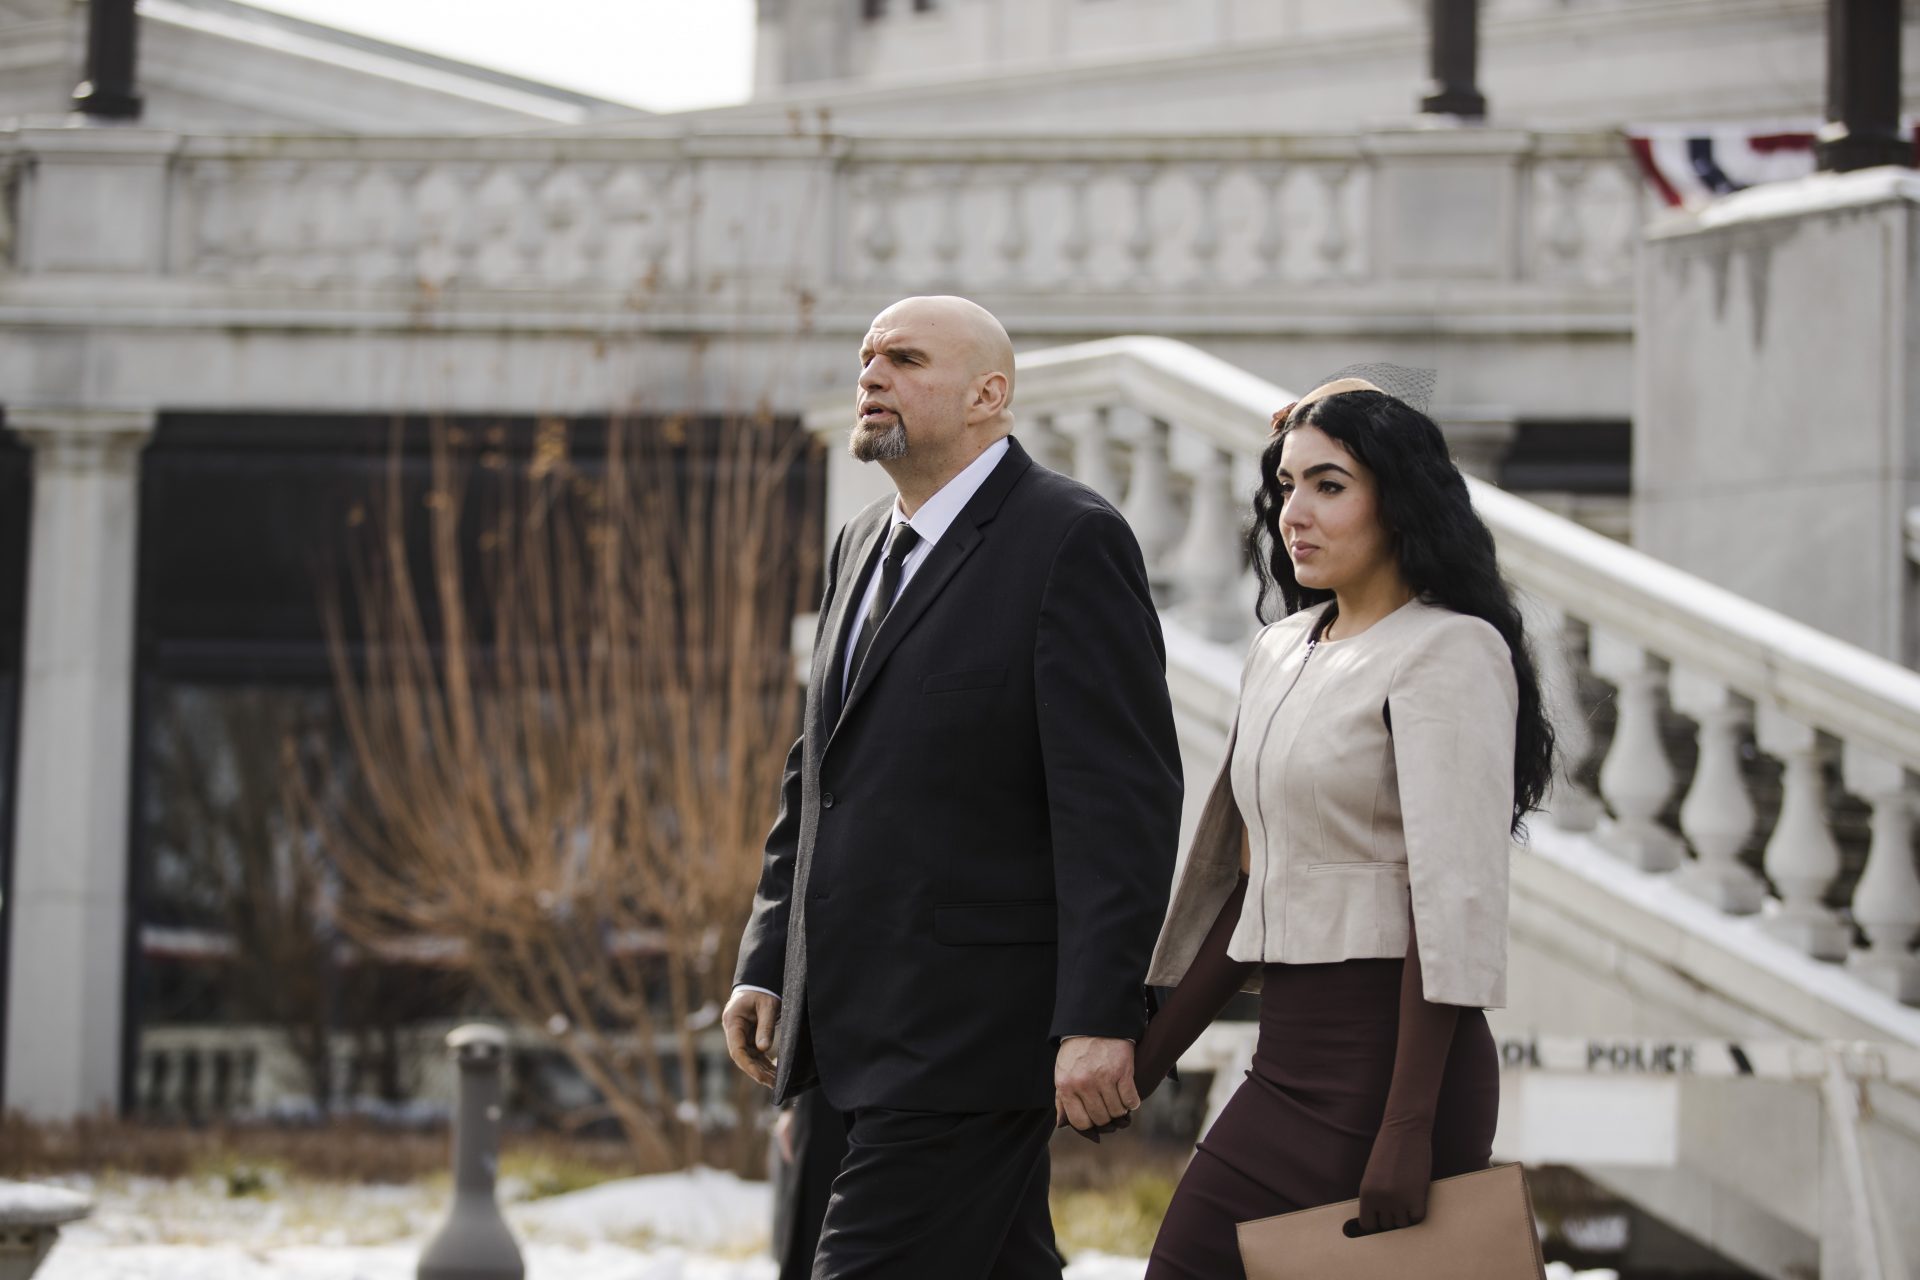 FILE PHOTO: Pennsylvania Lieutenant Governor John Fetterman and his wife Gisele walk to Pennsylvania Gov. Tom Wolf's inauguration, Tuesday, Jan. 15, 2019, at the state Capitol in Harrisburg, Pa.